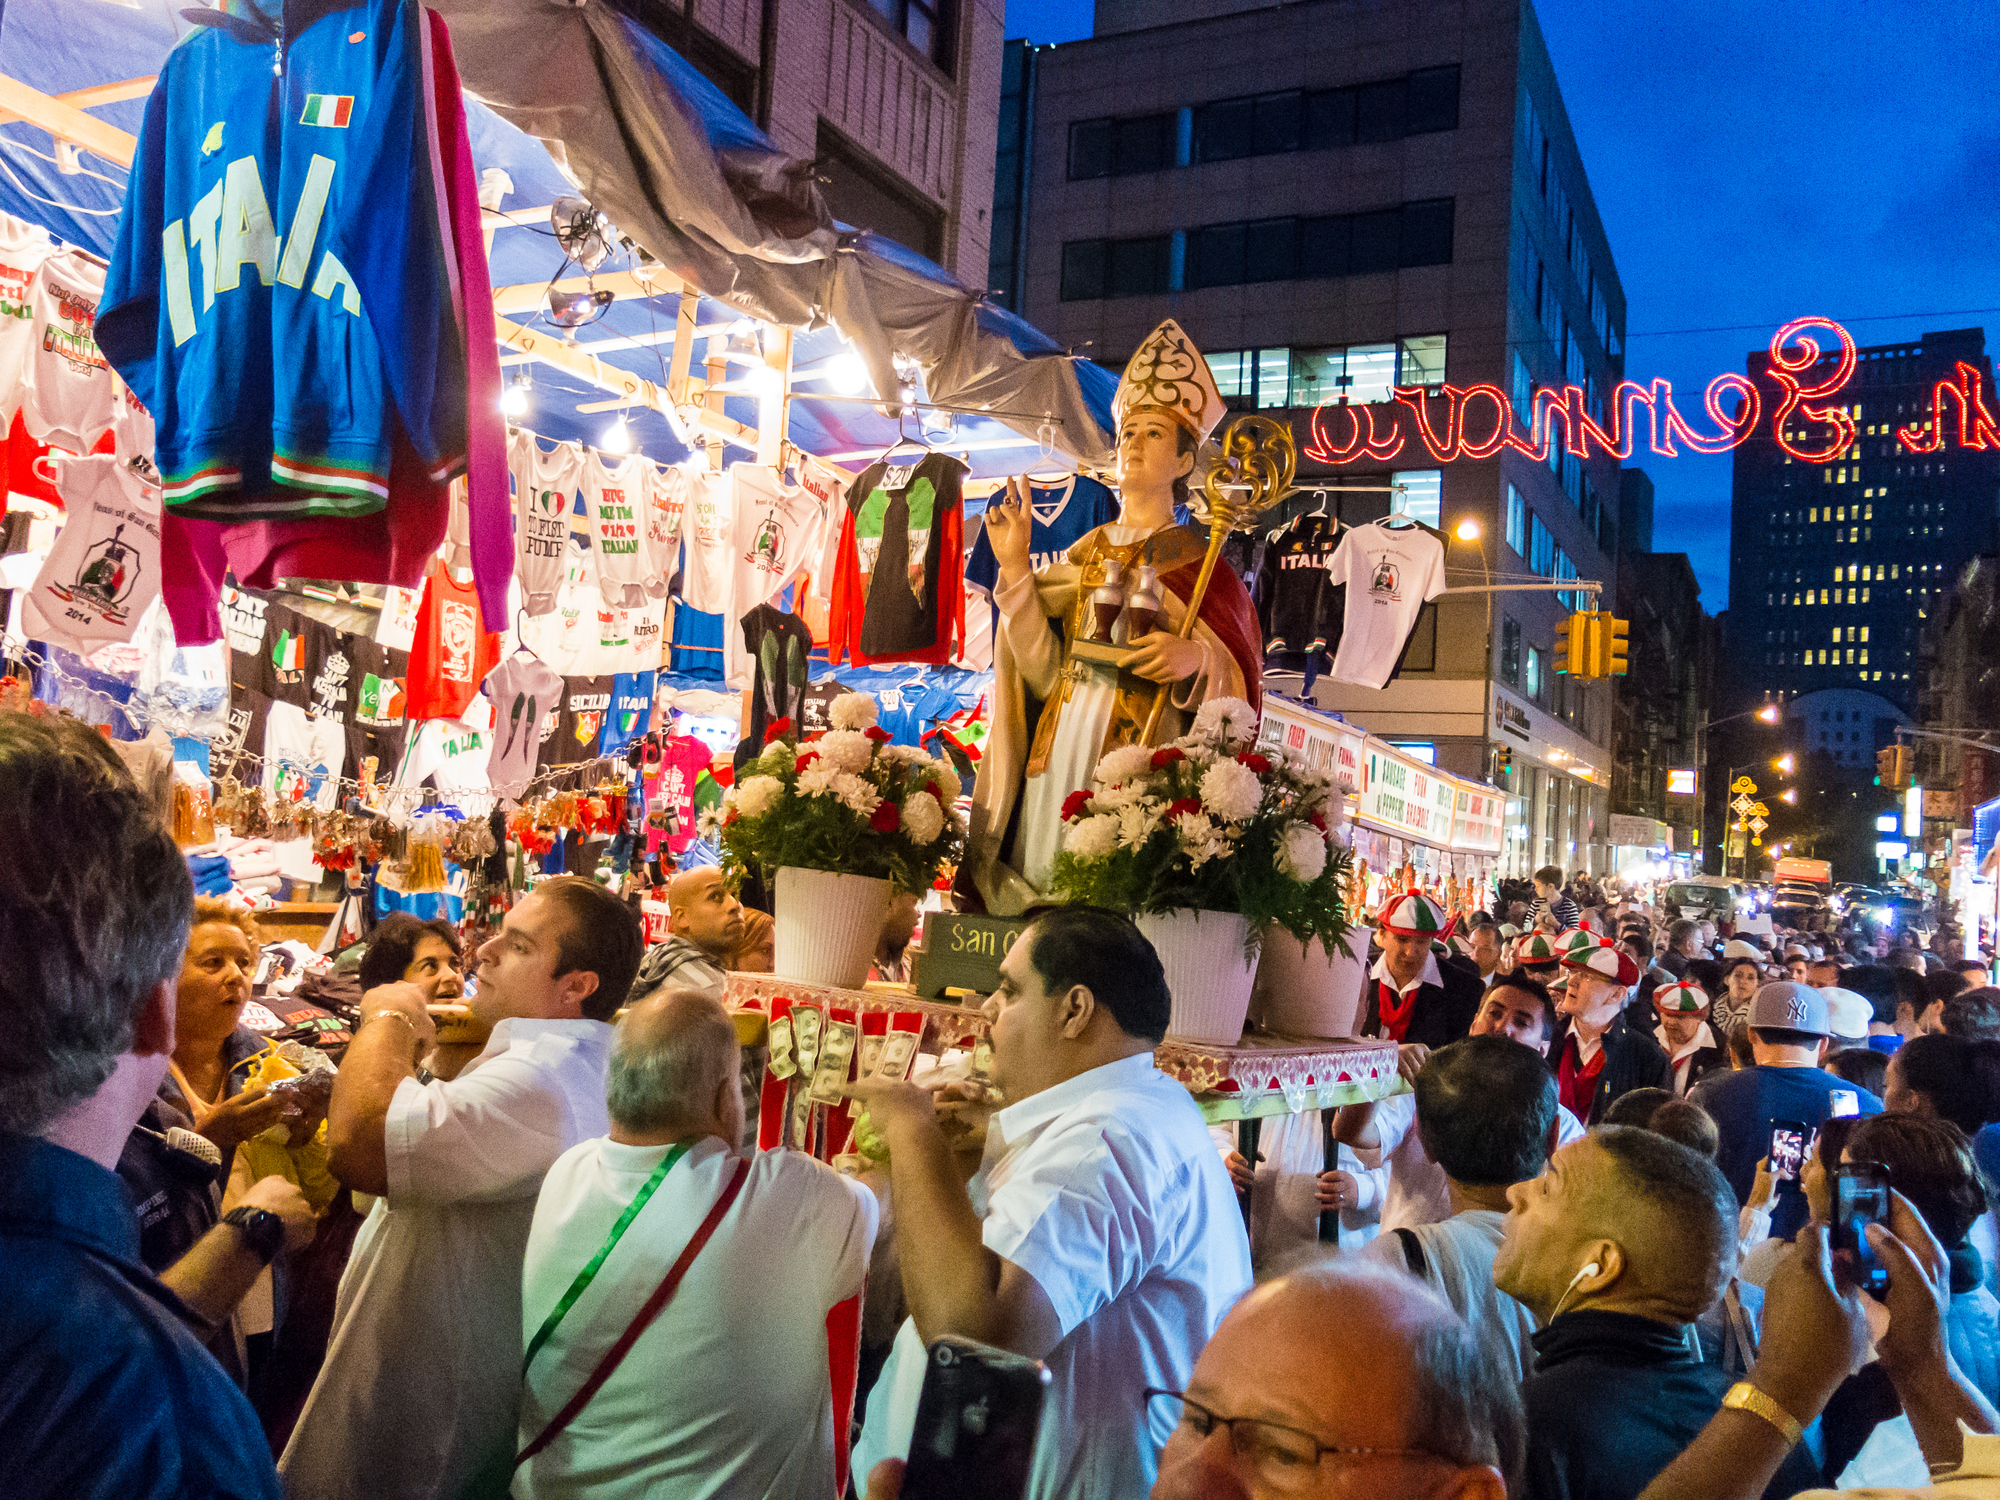 Can the Feast of San Gennaro hold on to its Catholic and Italian roots